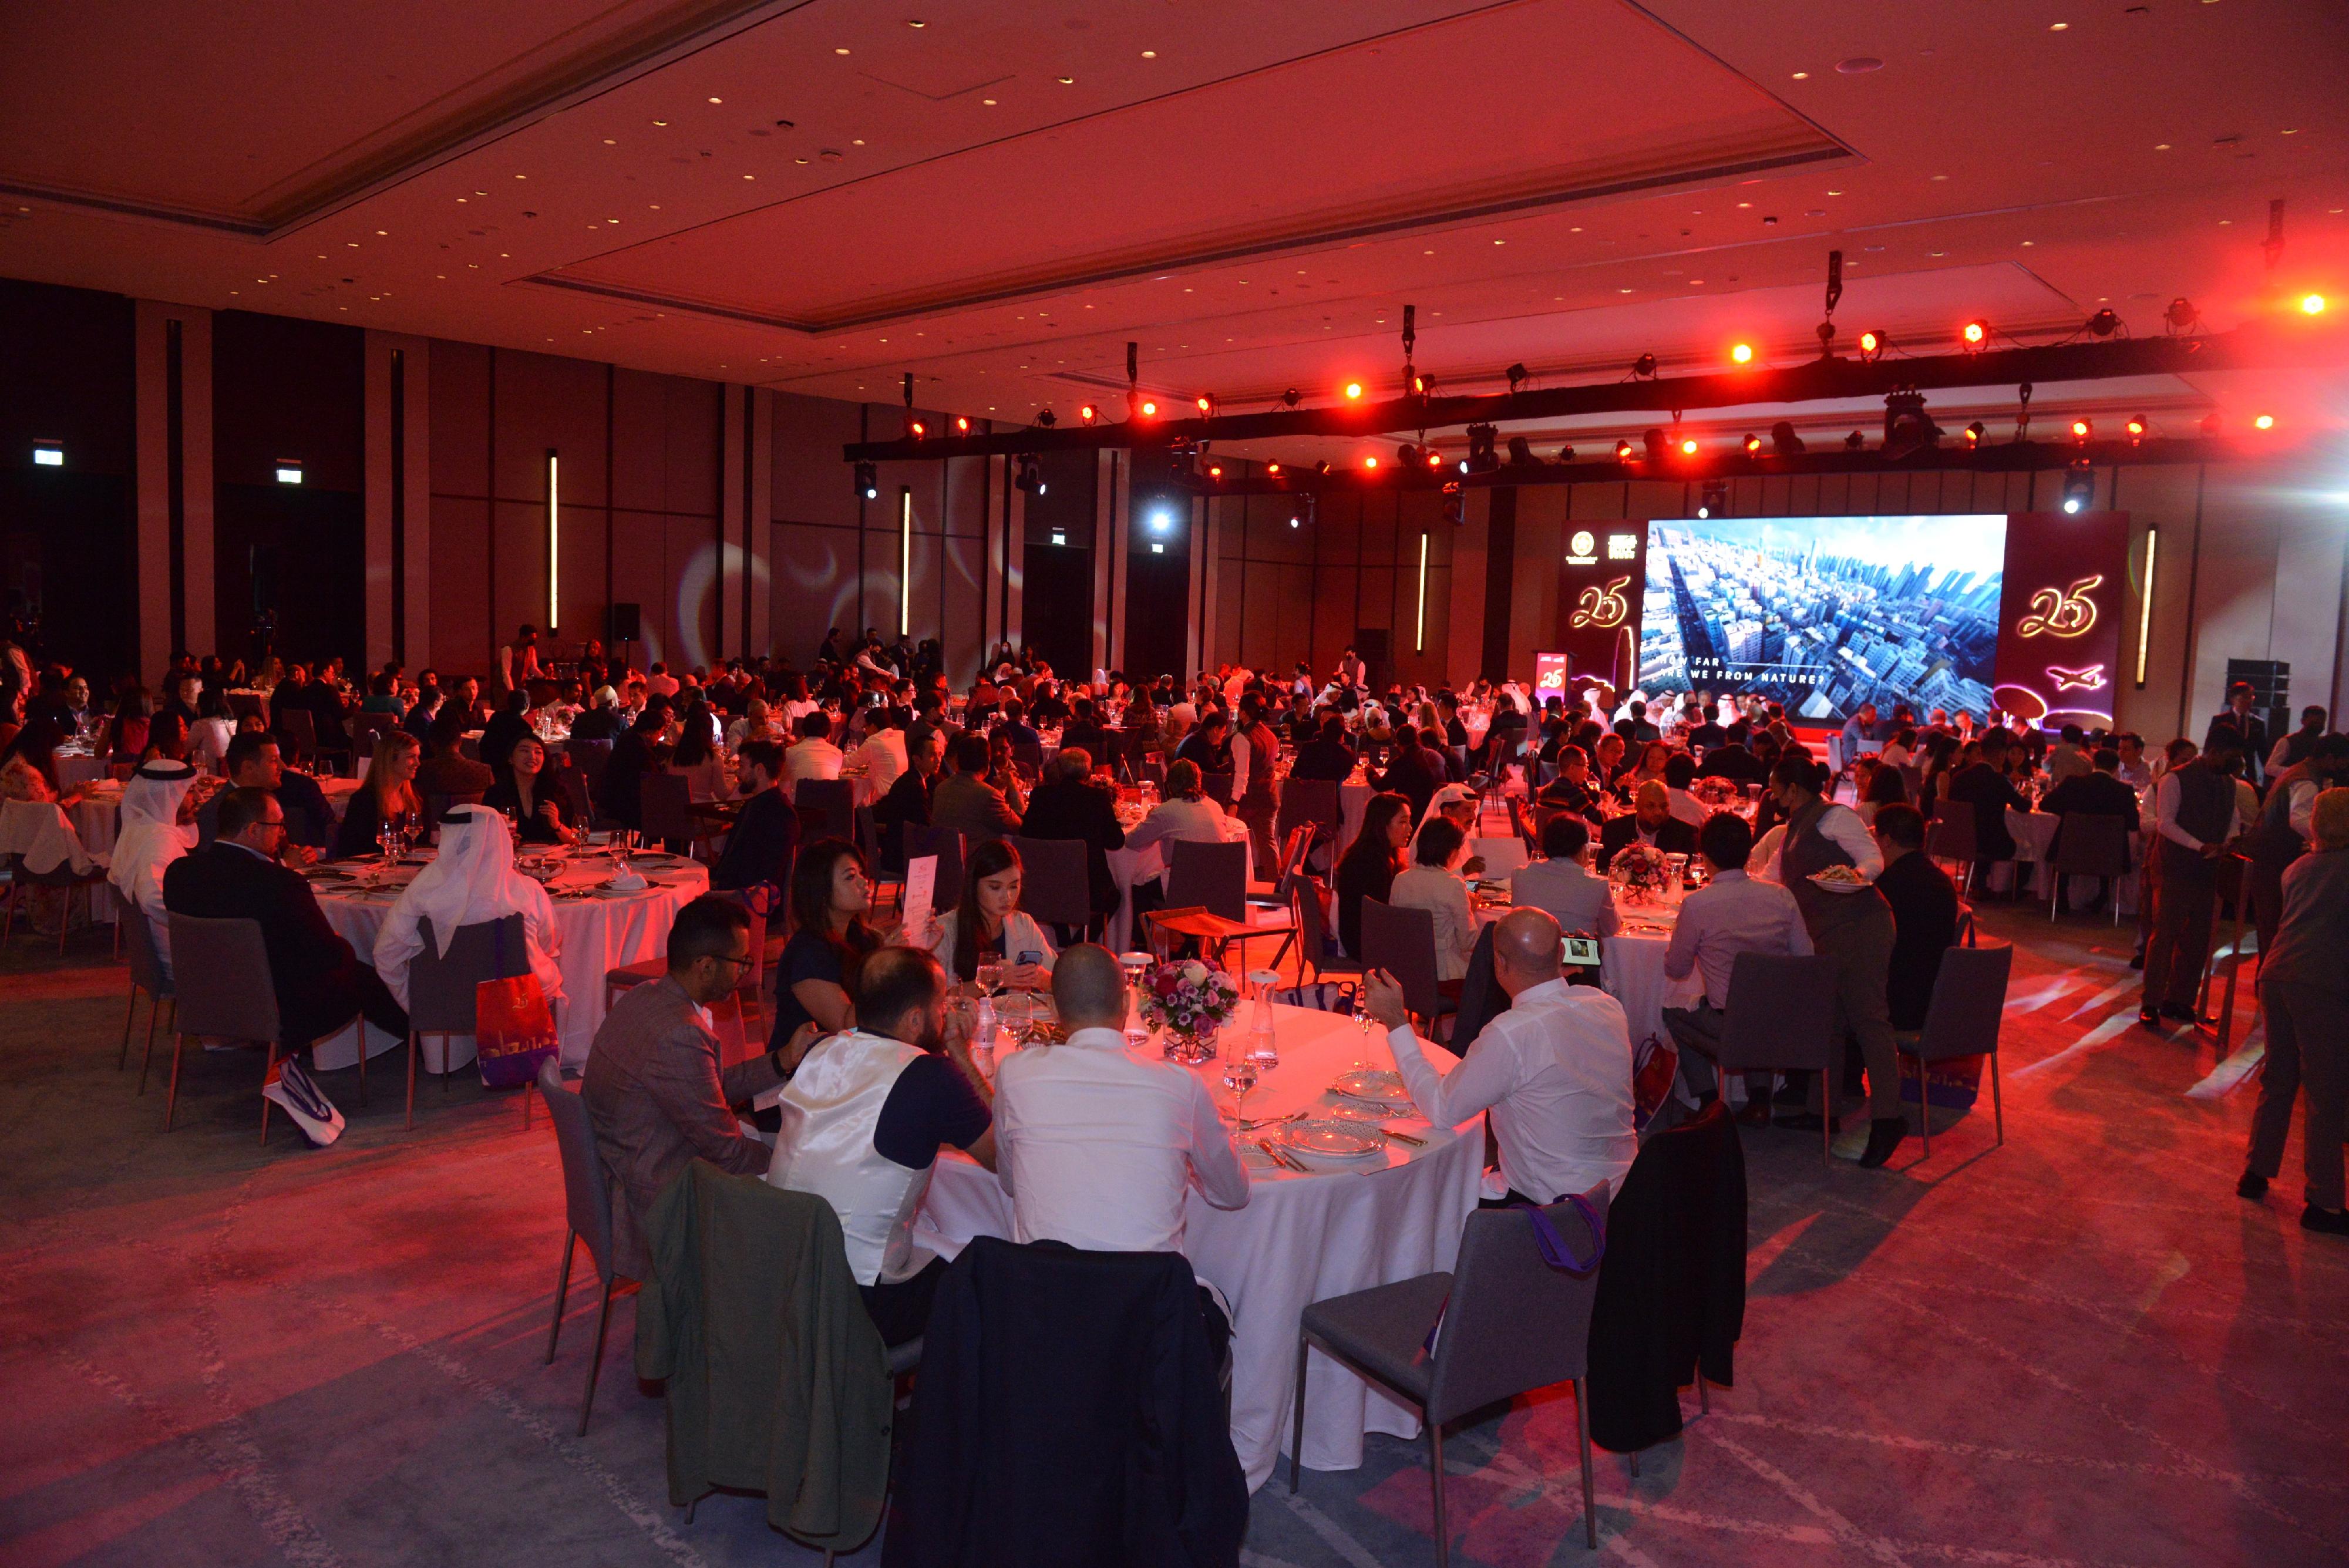 The Hong Kong Economic and Trade Office in Dubai held a gala dinner in Dubai on September 21 (Dubai time) to celebrate the 25th anniversary of the establishment of the Hong Kong Special Administrative Region. More than 250 guests from various sectors attended the event, including government officials, representatives of business chambers, business leaders, as well as the members of the Hong Kong community in the United Arab Emirates. 